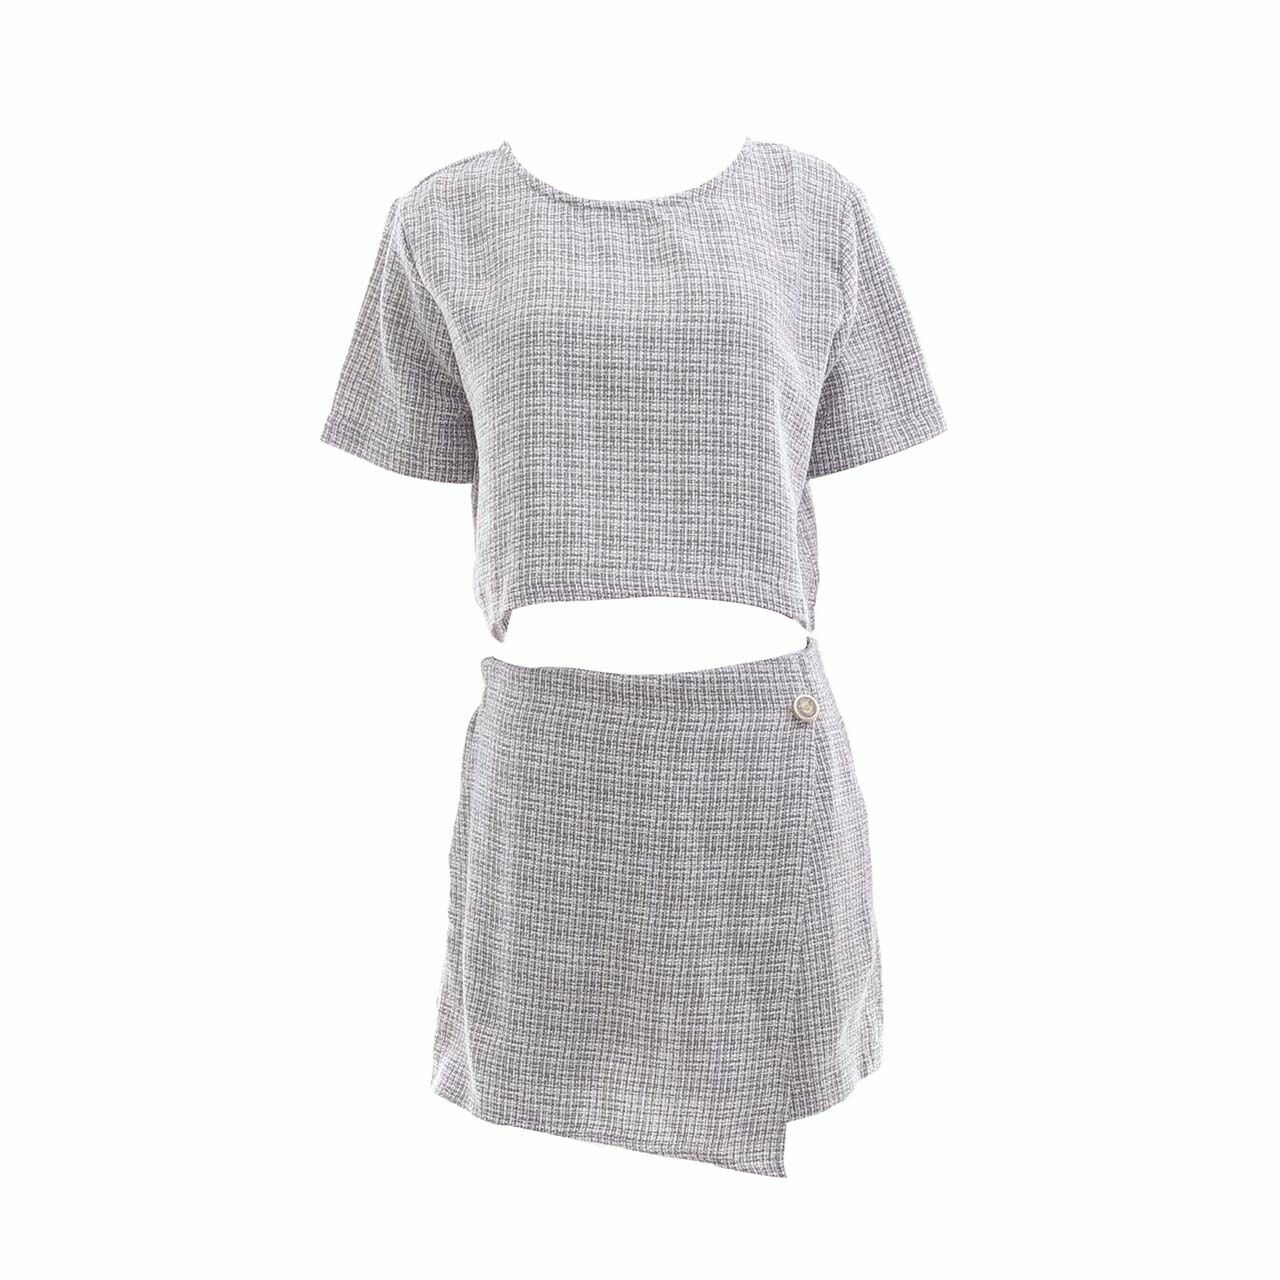 Aubrie Grey White Patterned Two Piece